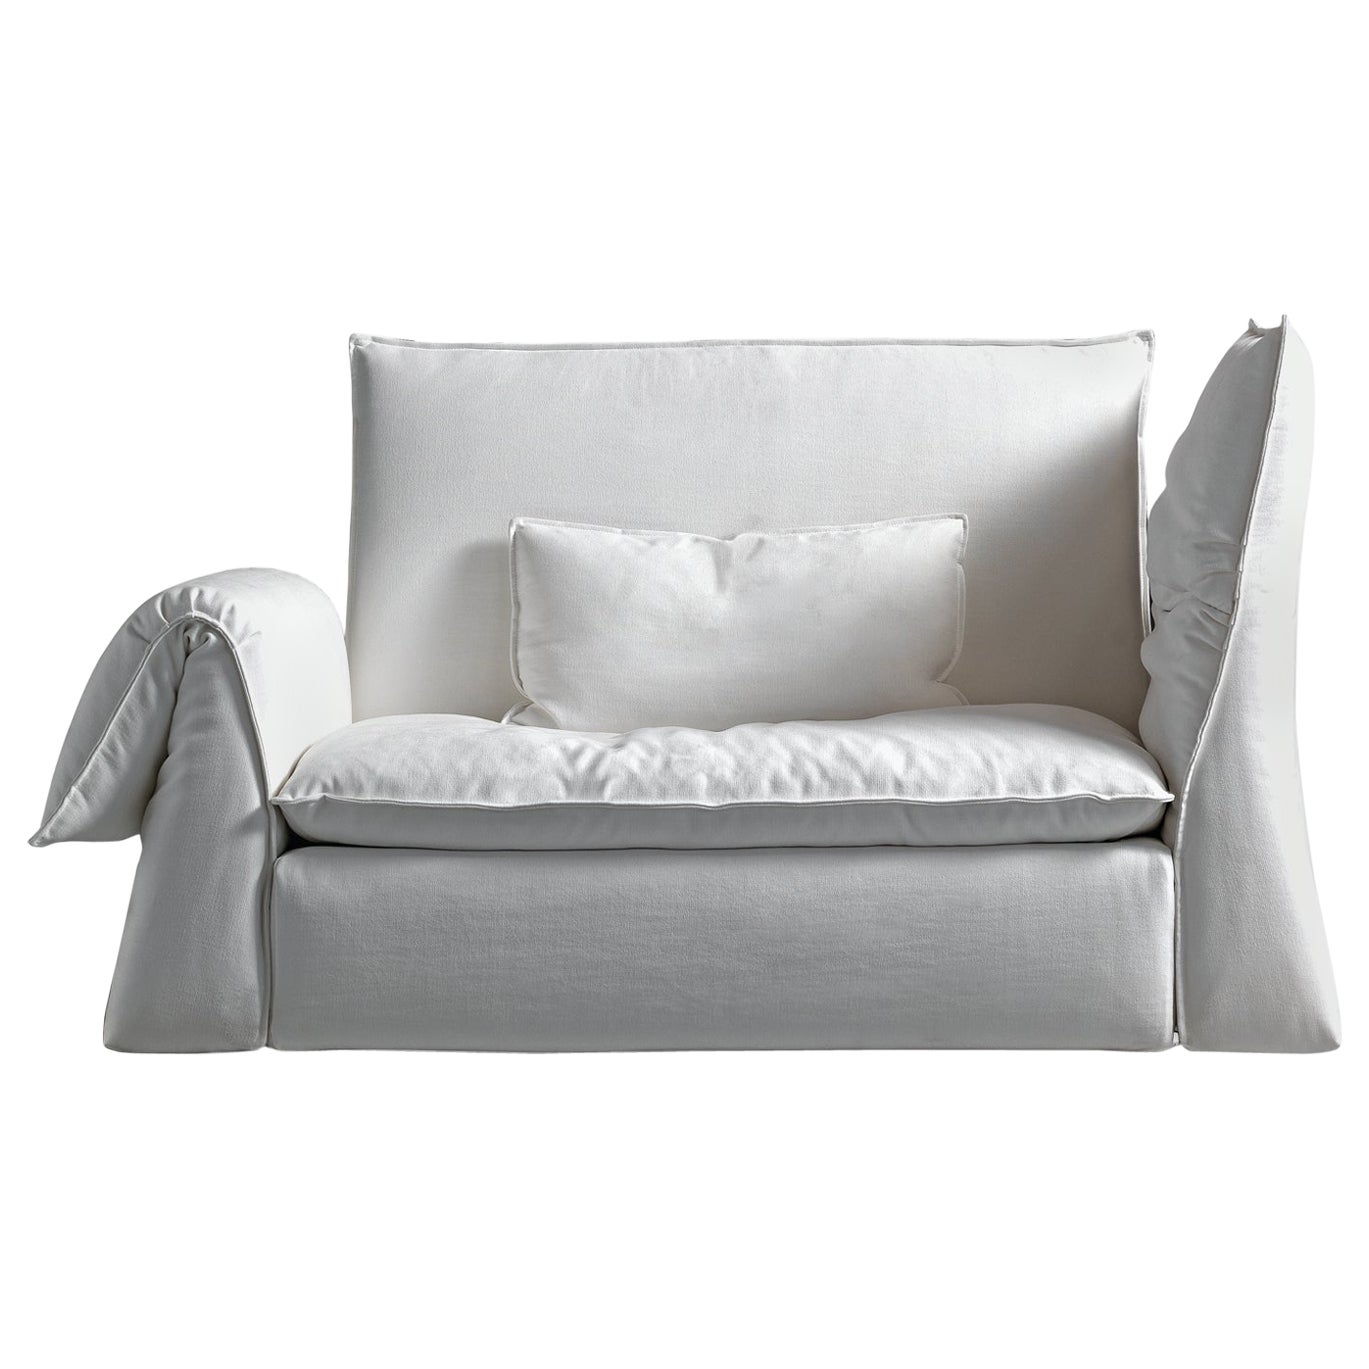 Les Femmes Small Foldable Armchair in Byblos White Upholstery by Giuseppe Viganò